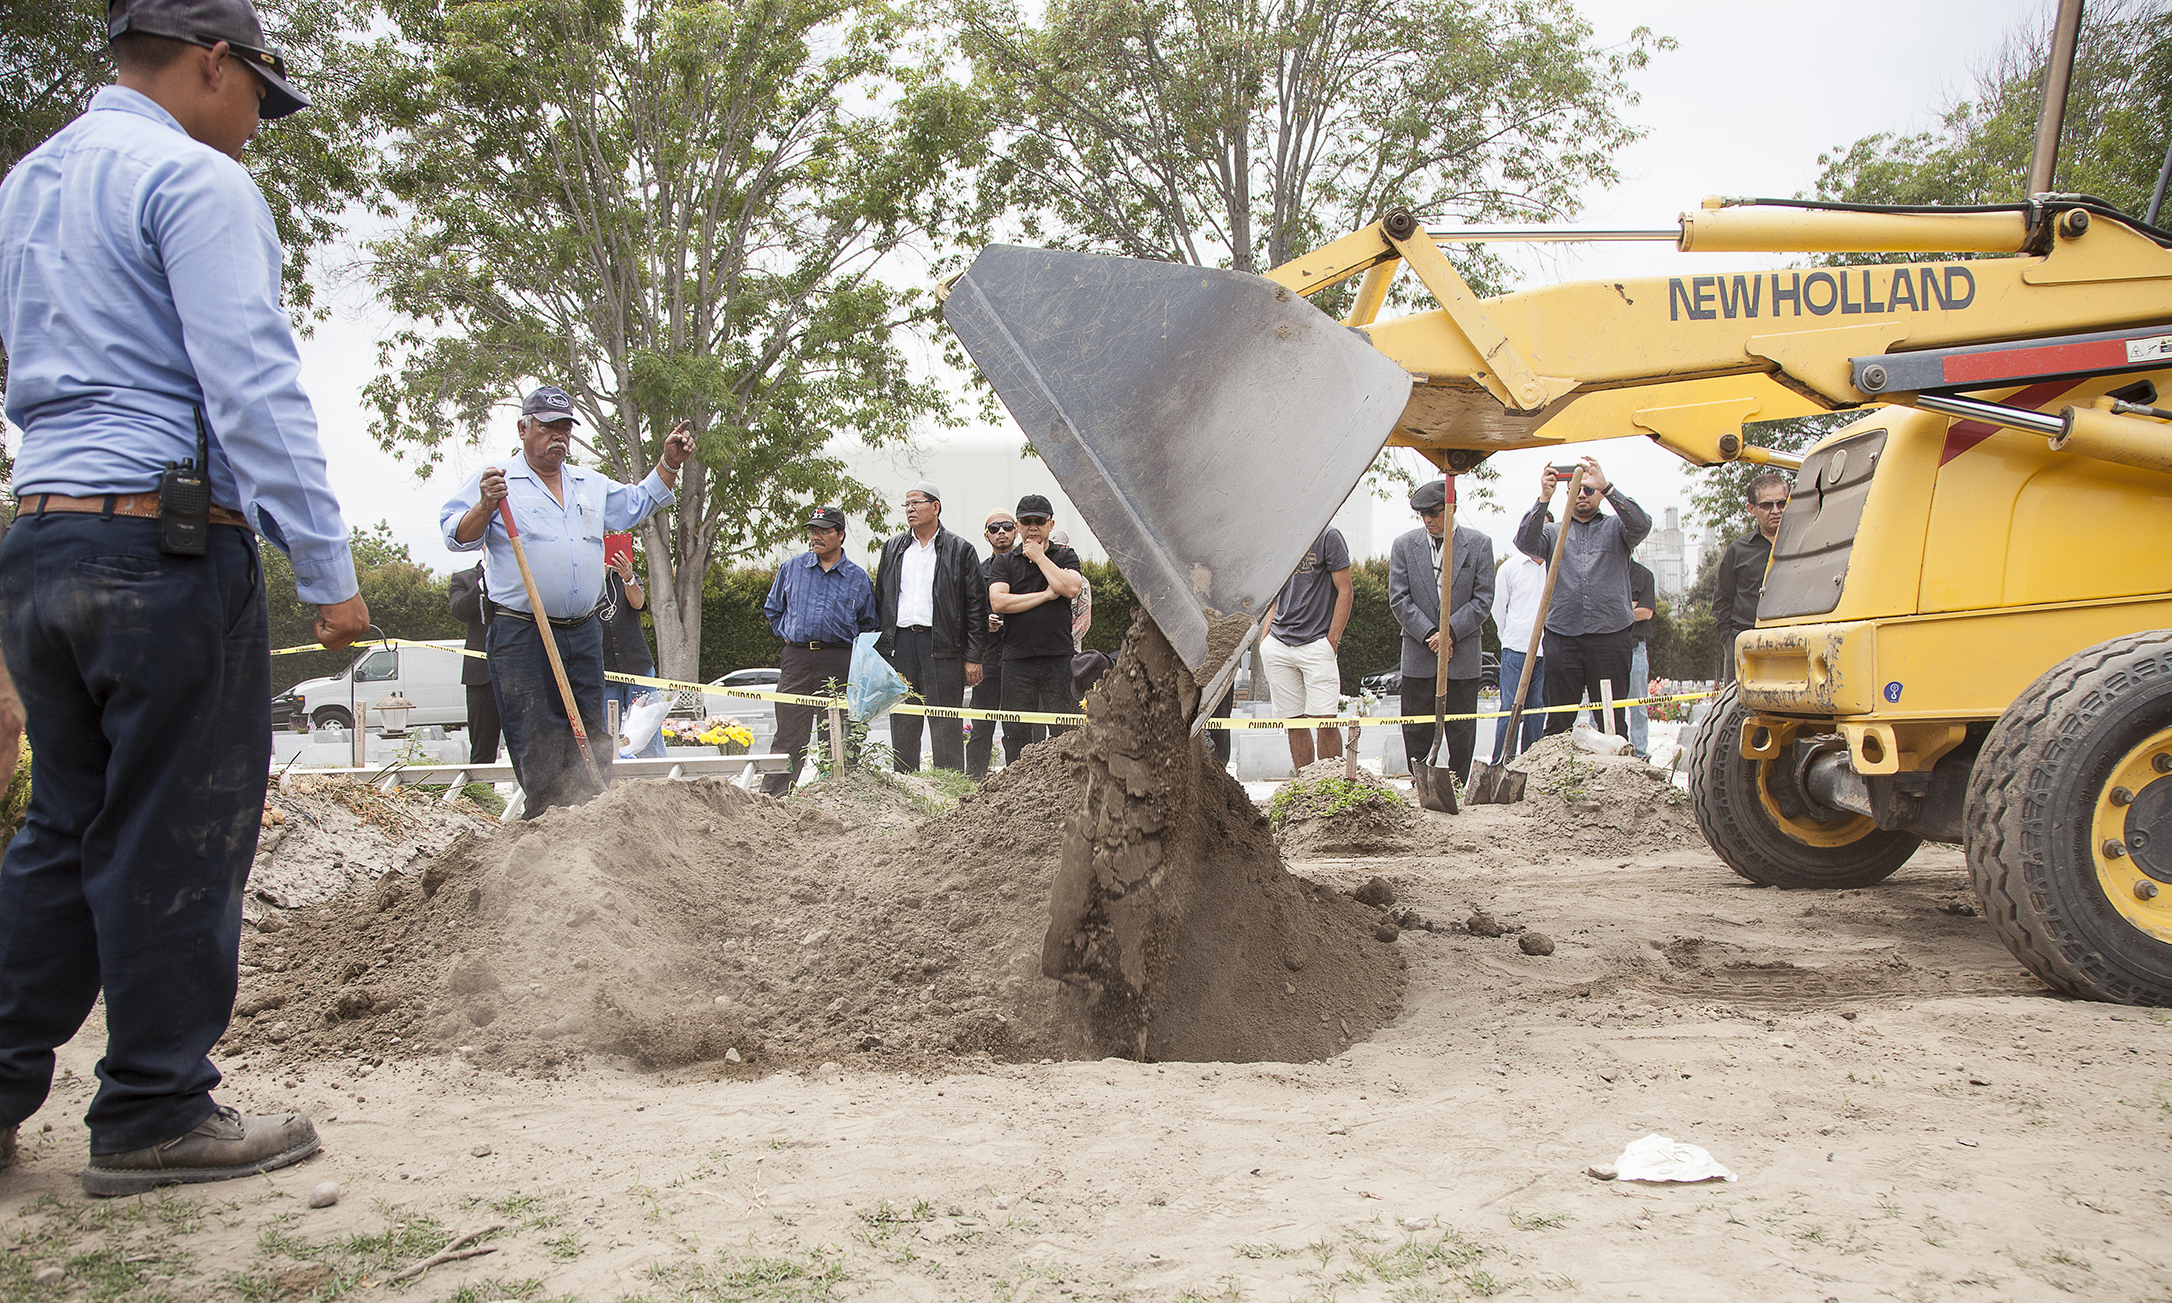  After lowering a concrete slab over my father's grave, a bulldozer pushes and fill's the grave with dirt on Saturday, June 27, 2015, completing the burial process. 